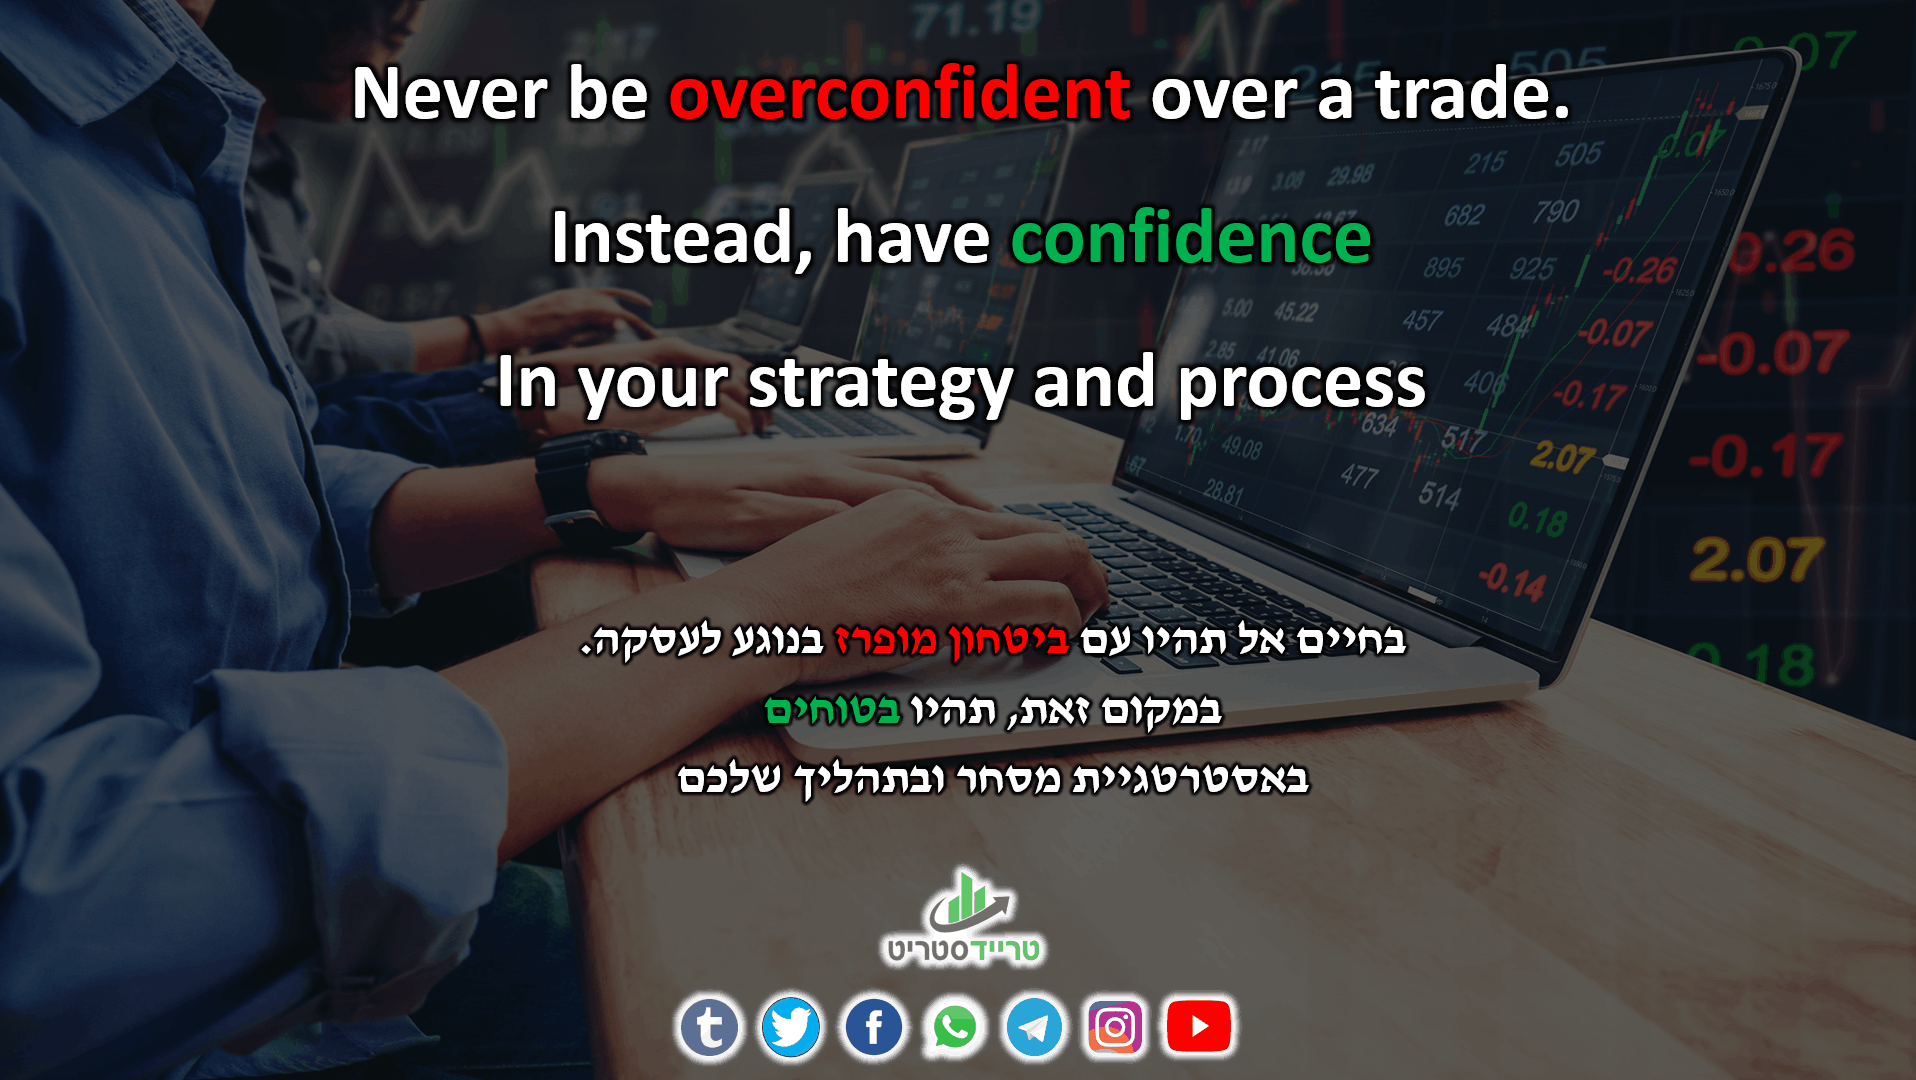 Never be overconfident over a trade. Instead, have confidence